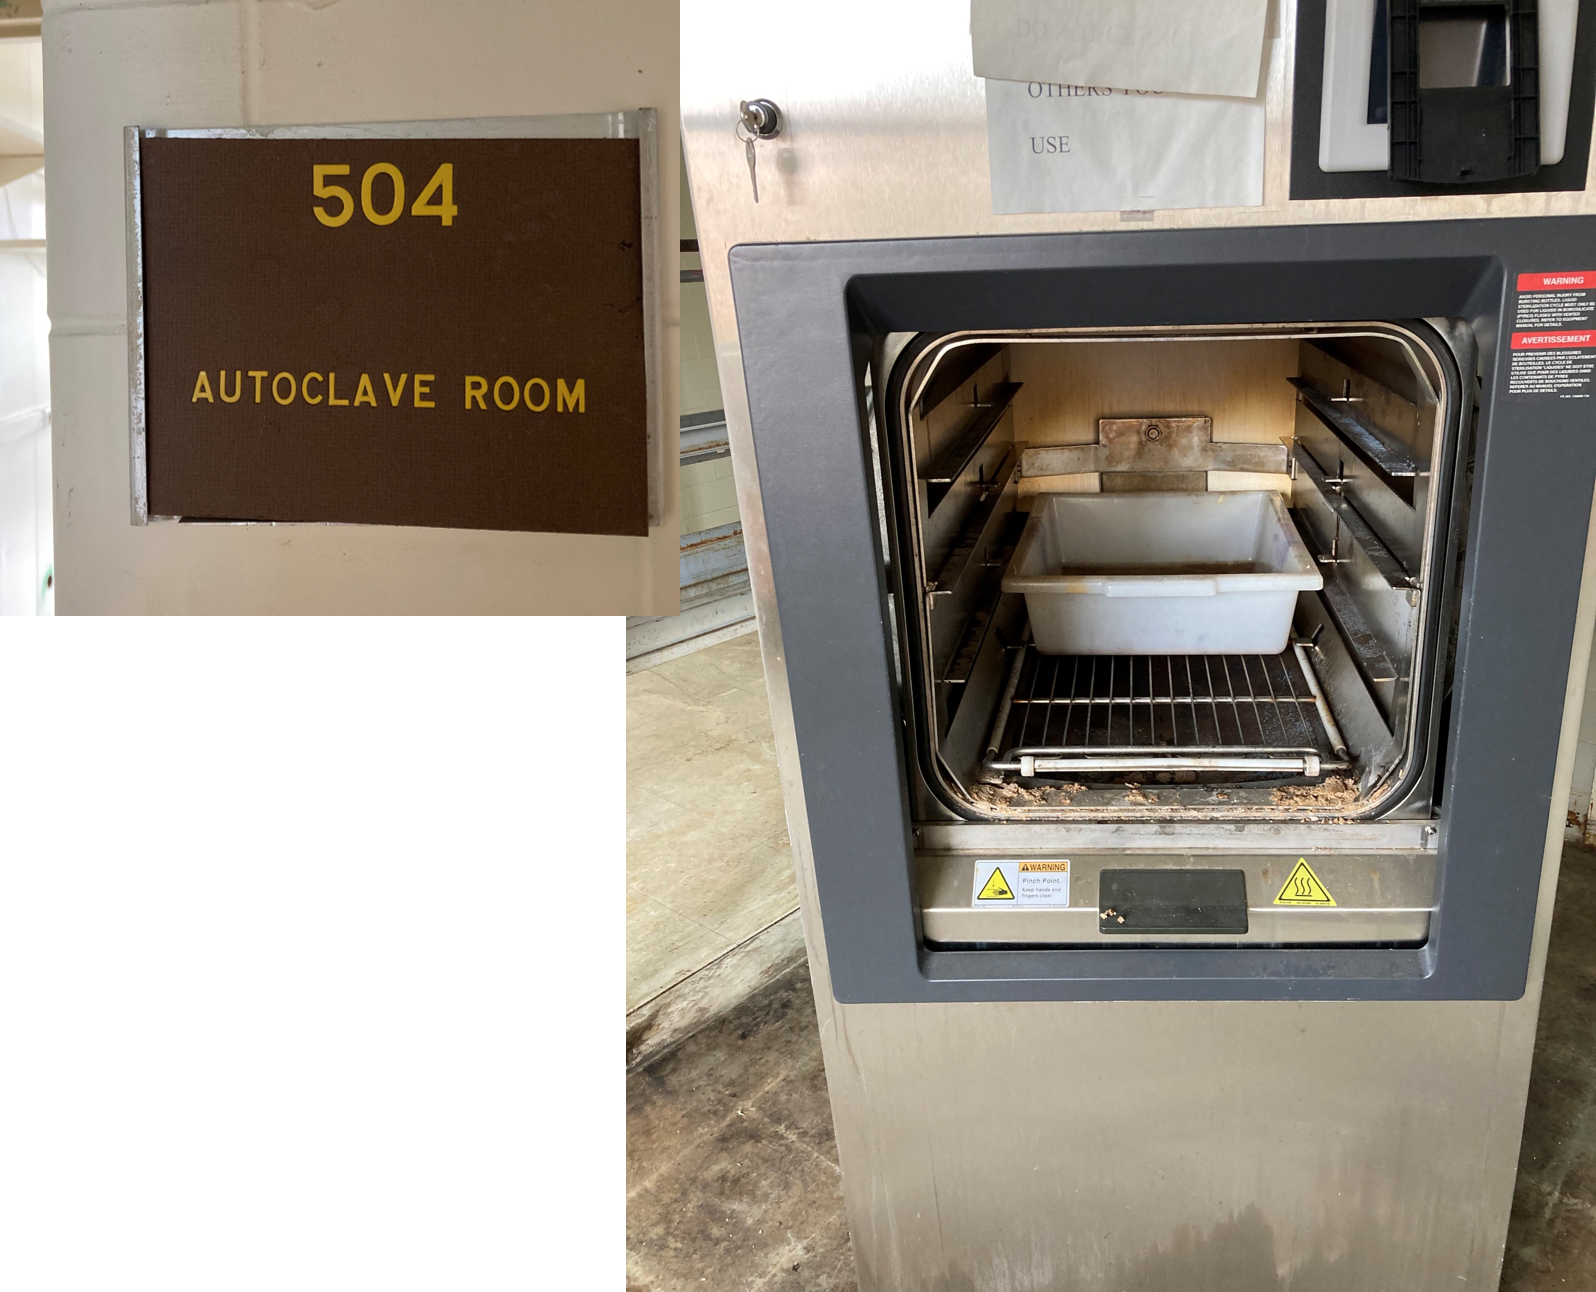 A montage of two photos. One showing an autoclave with a plastic container on a rack inside. The other is an image of the sign on the door reading Room 504 Autoclave Room